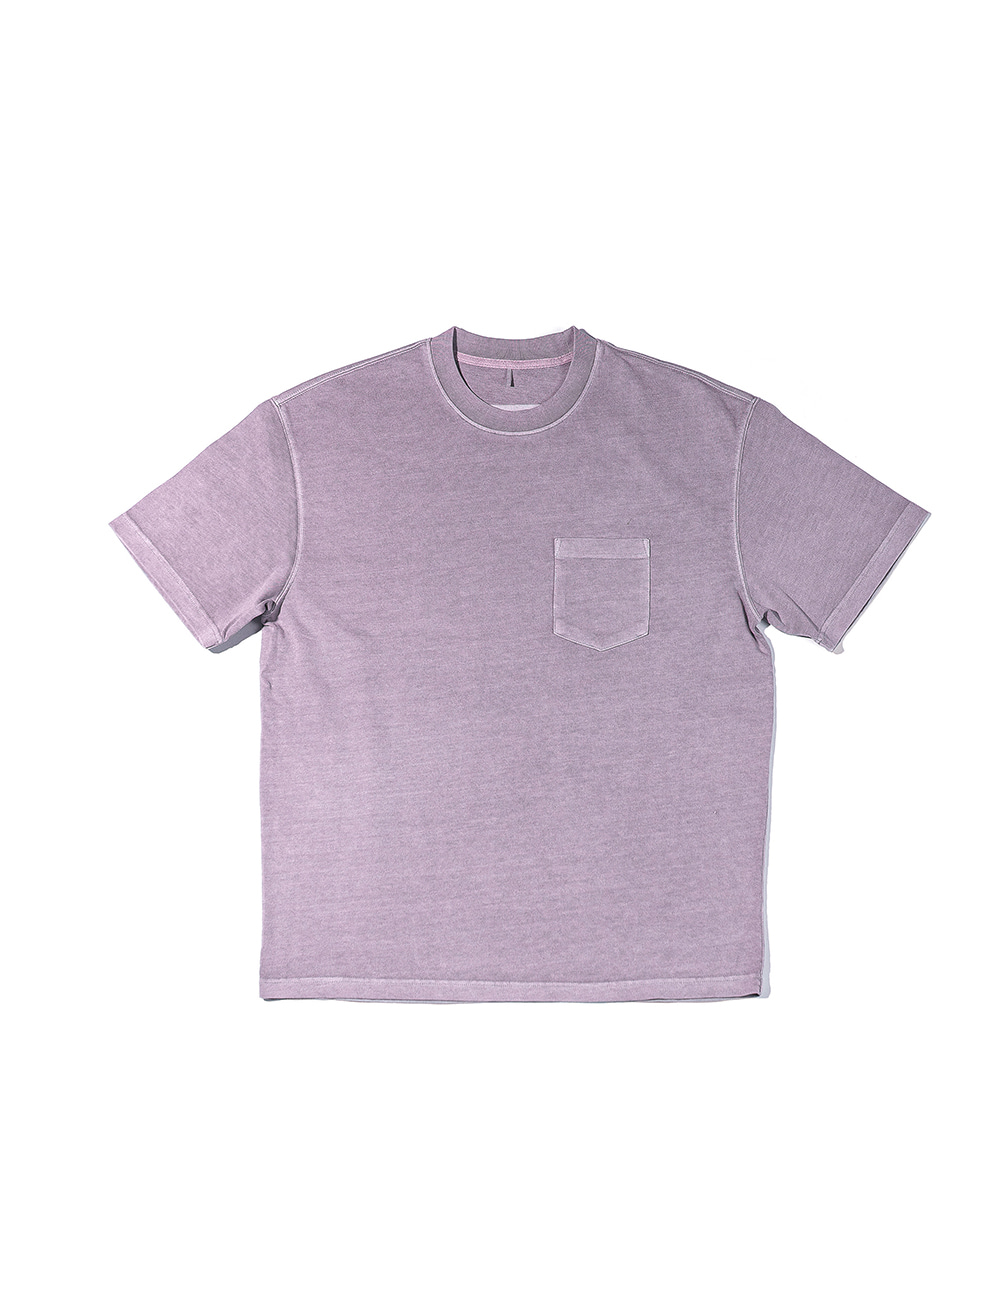 [Ourselves] NONCARE T-SHIRTS (dusty purple)